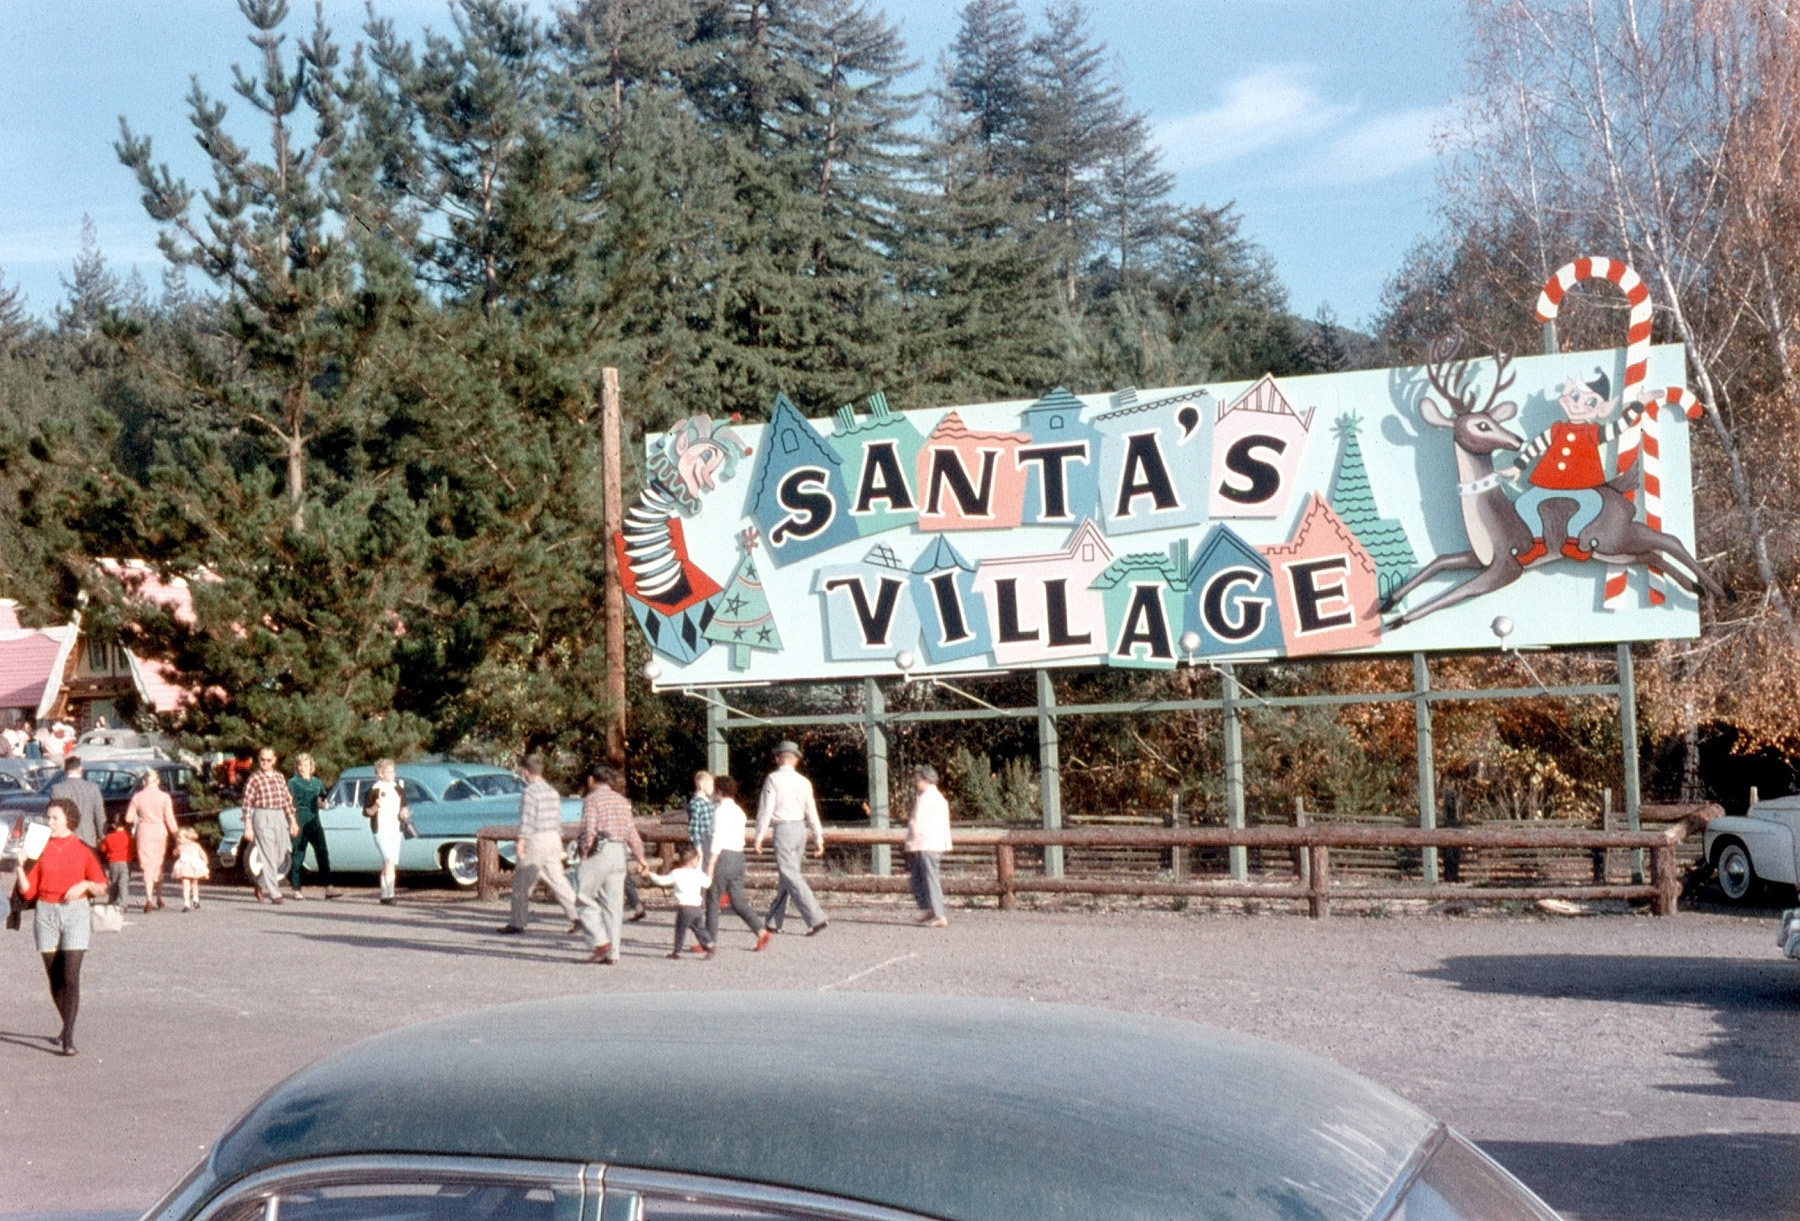 In its heyday, Santa's Village was one of Southern California's biggest tourist attractions -- a place to catch the holiday spirit even in July. It opened on Memorial Day weekend 1955, more than a month before Disneyland.

Here we are, in 1958, making a stop at Santa's Village just outisde of San Bernadino and Lake Arrowhead, as a part of our annual trip to visit all the grandparents, aunts, uncles, and cousins in Los Angeles. Santa's Village closed its doors in the late 1990s, but the Anscochrome slides remain. Good times for a kid that had just turned seven! View full size.